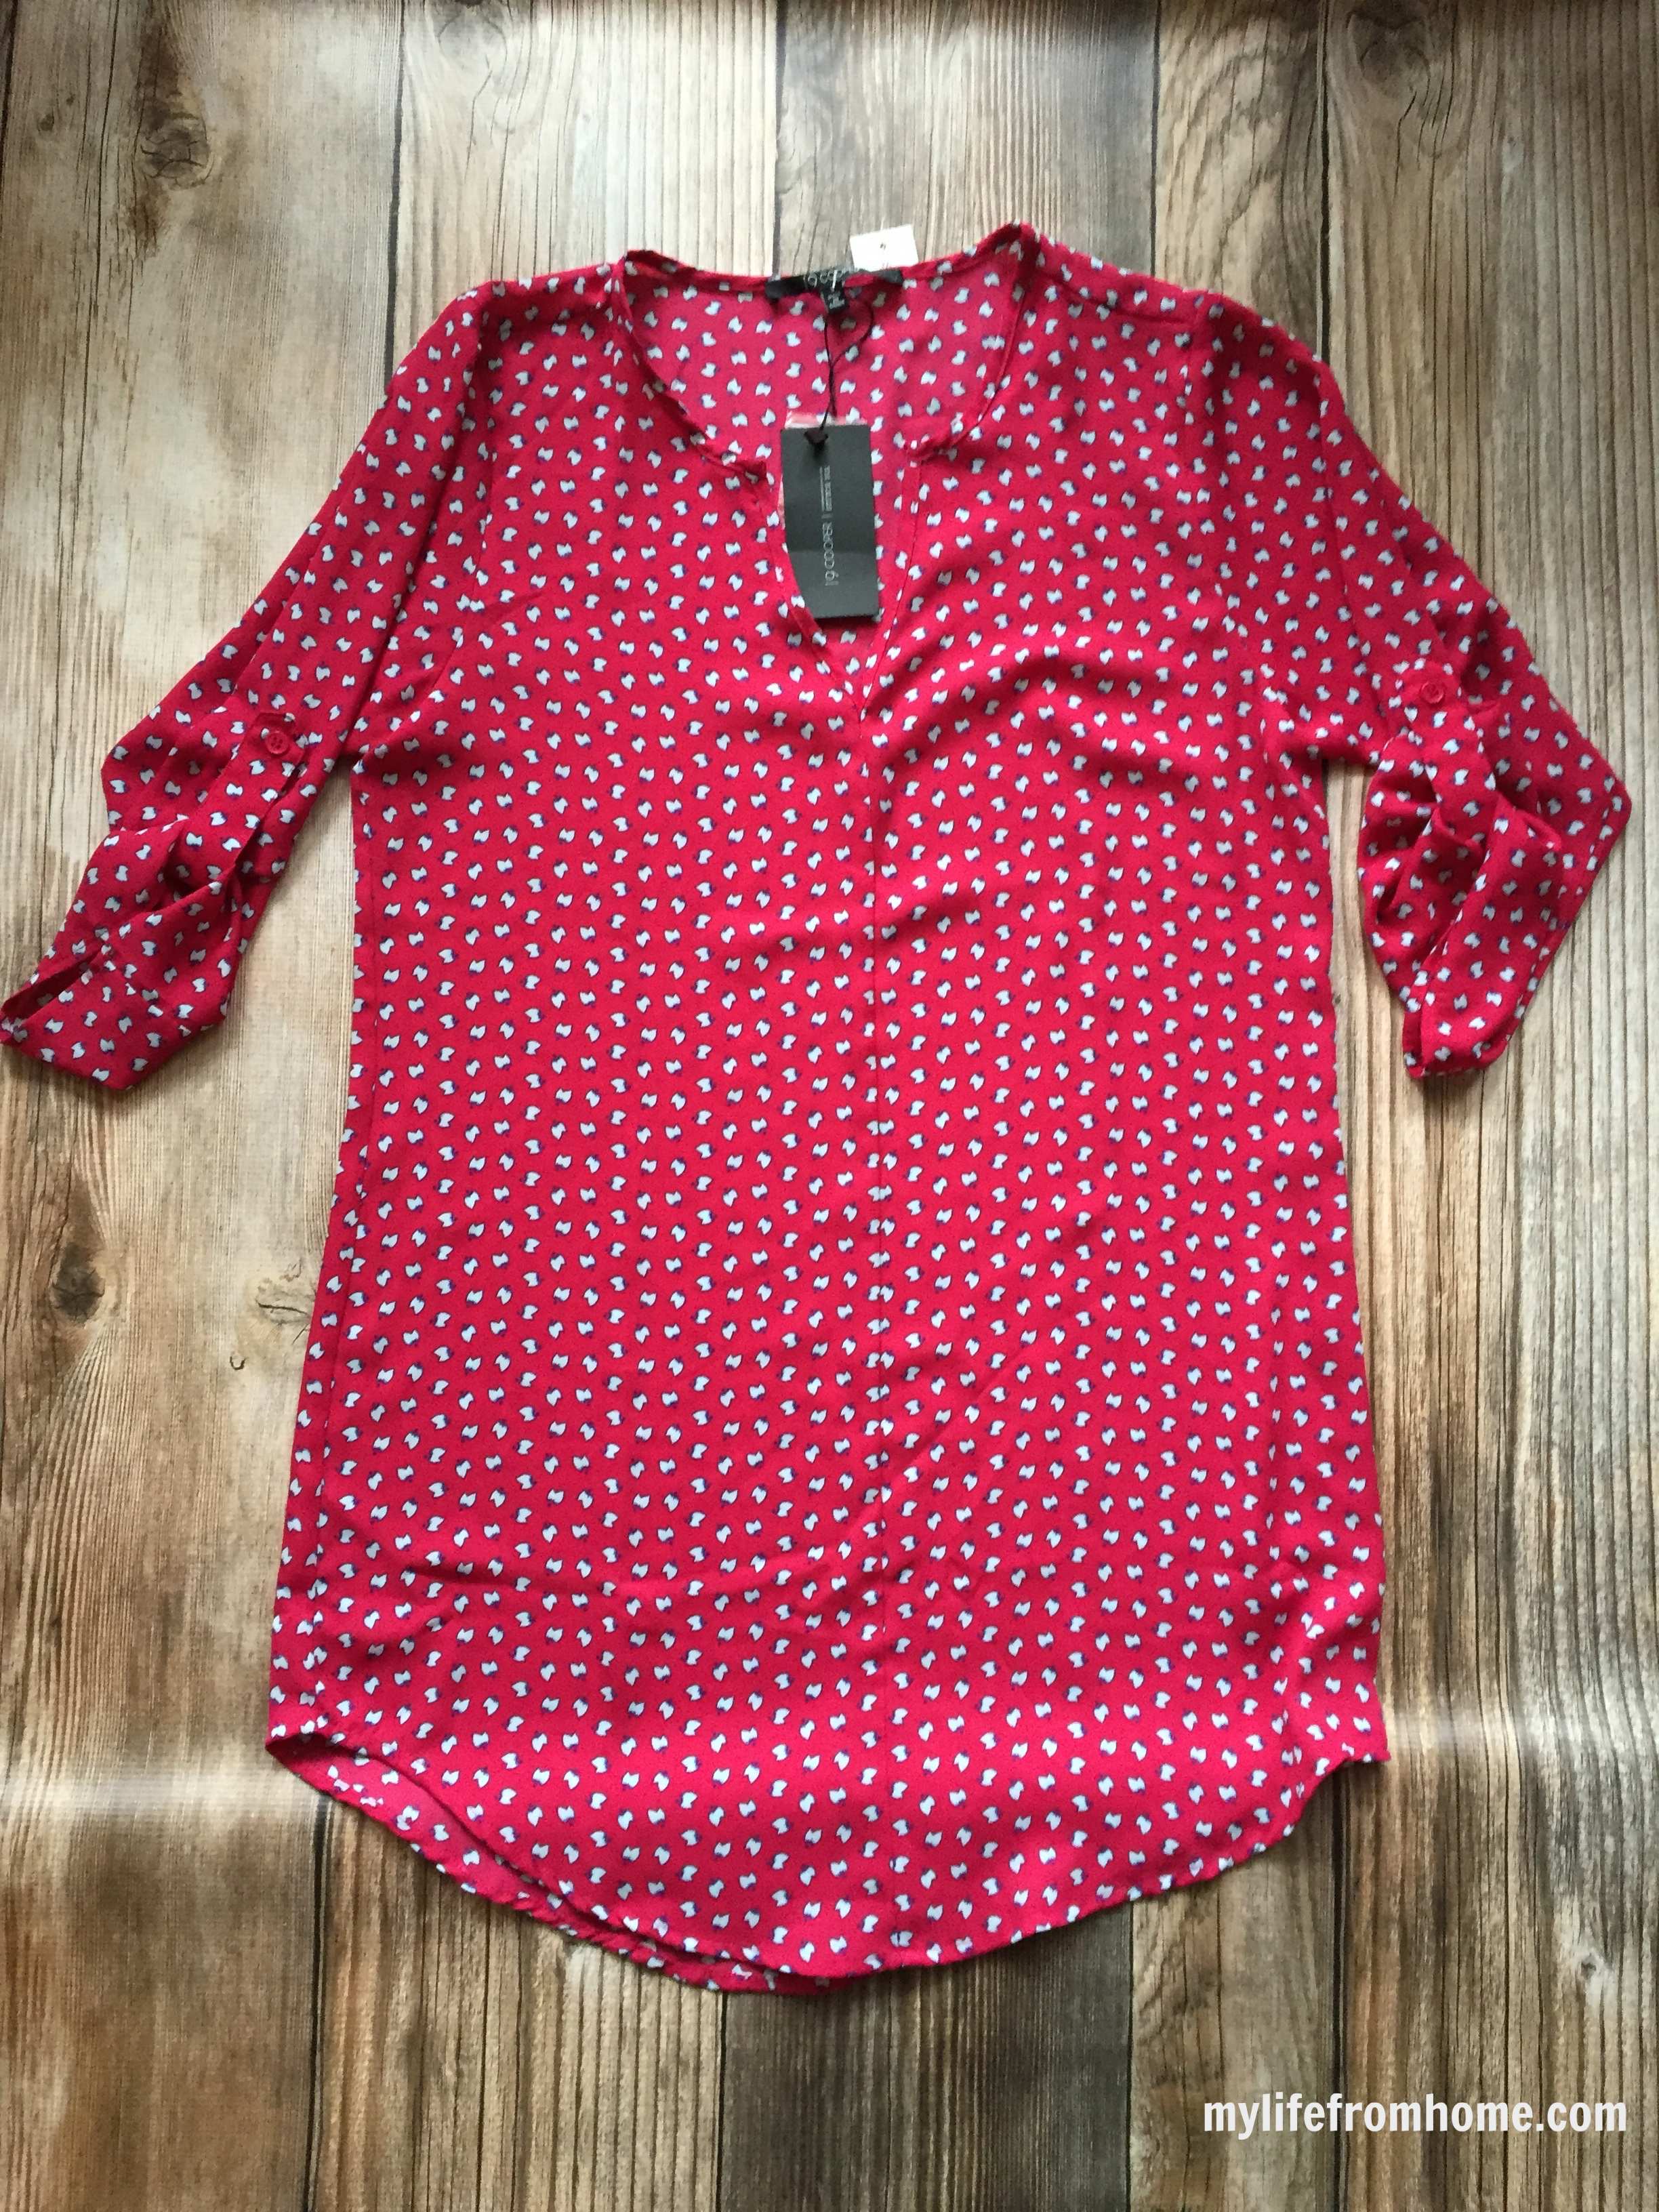 Stitch Fix Blouse by www.whitecottagehomeandliving.com